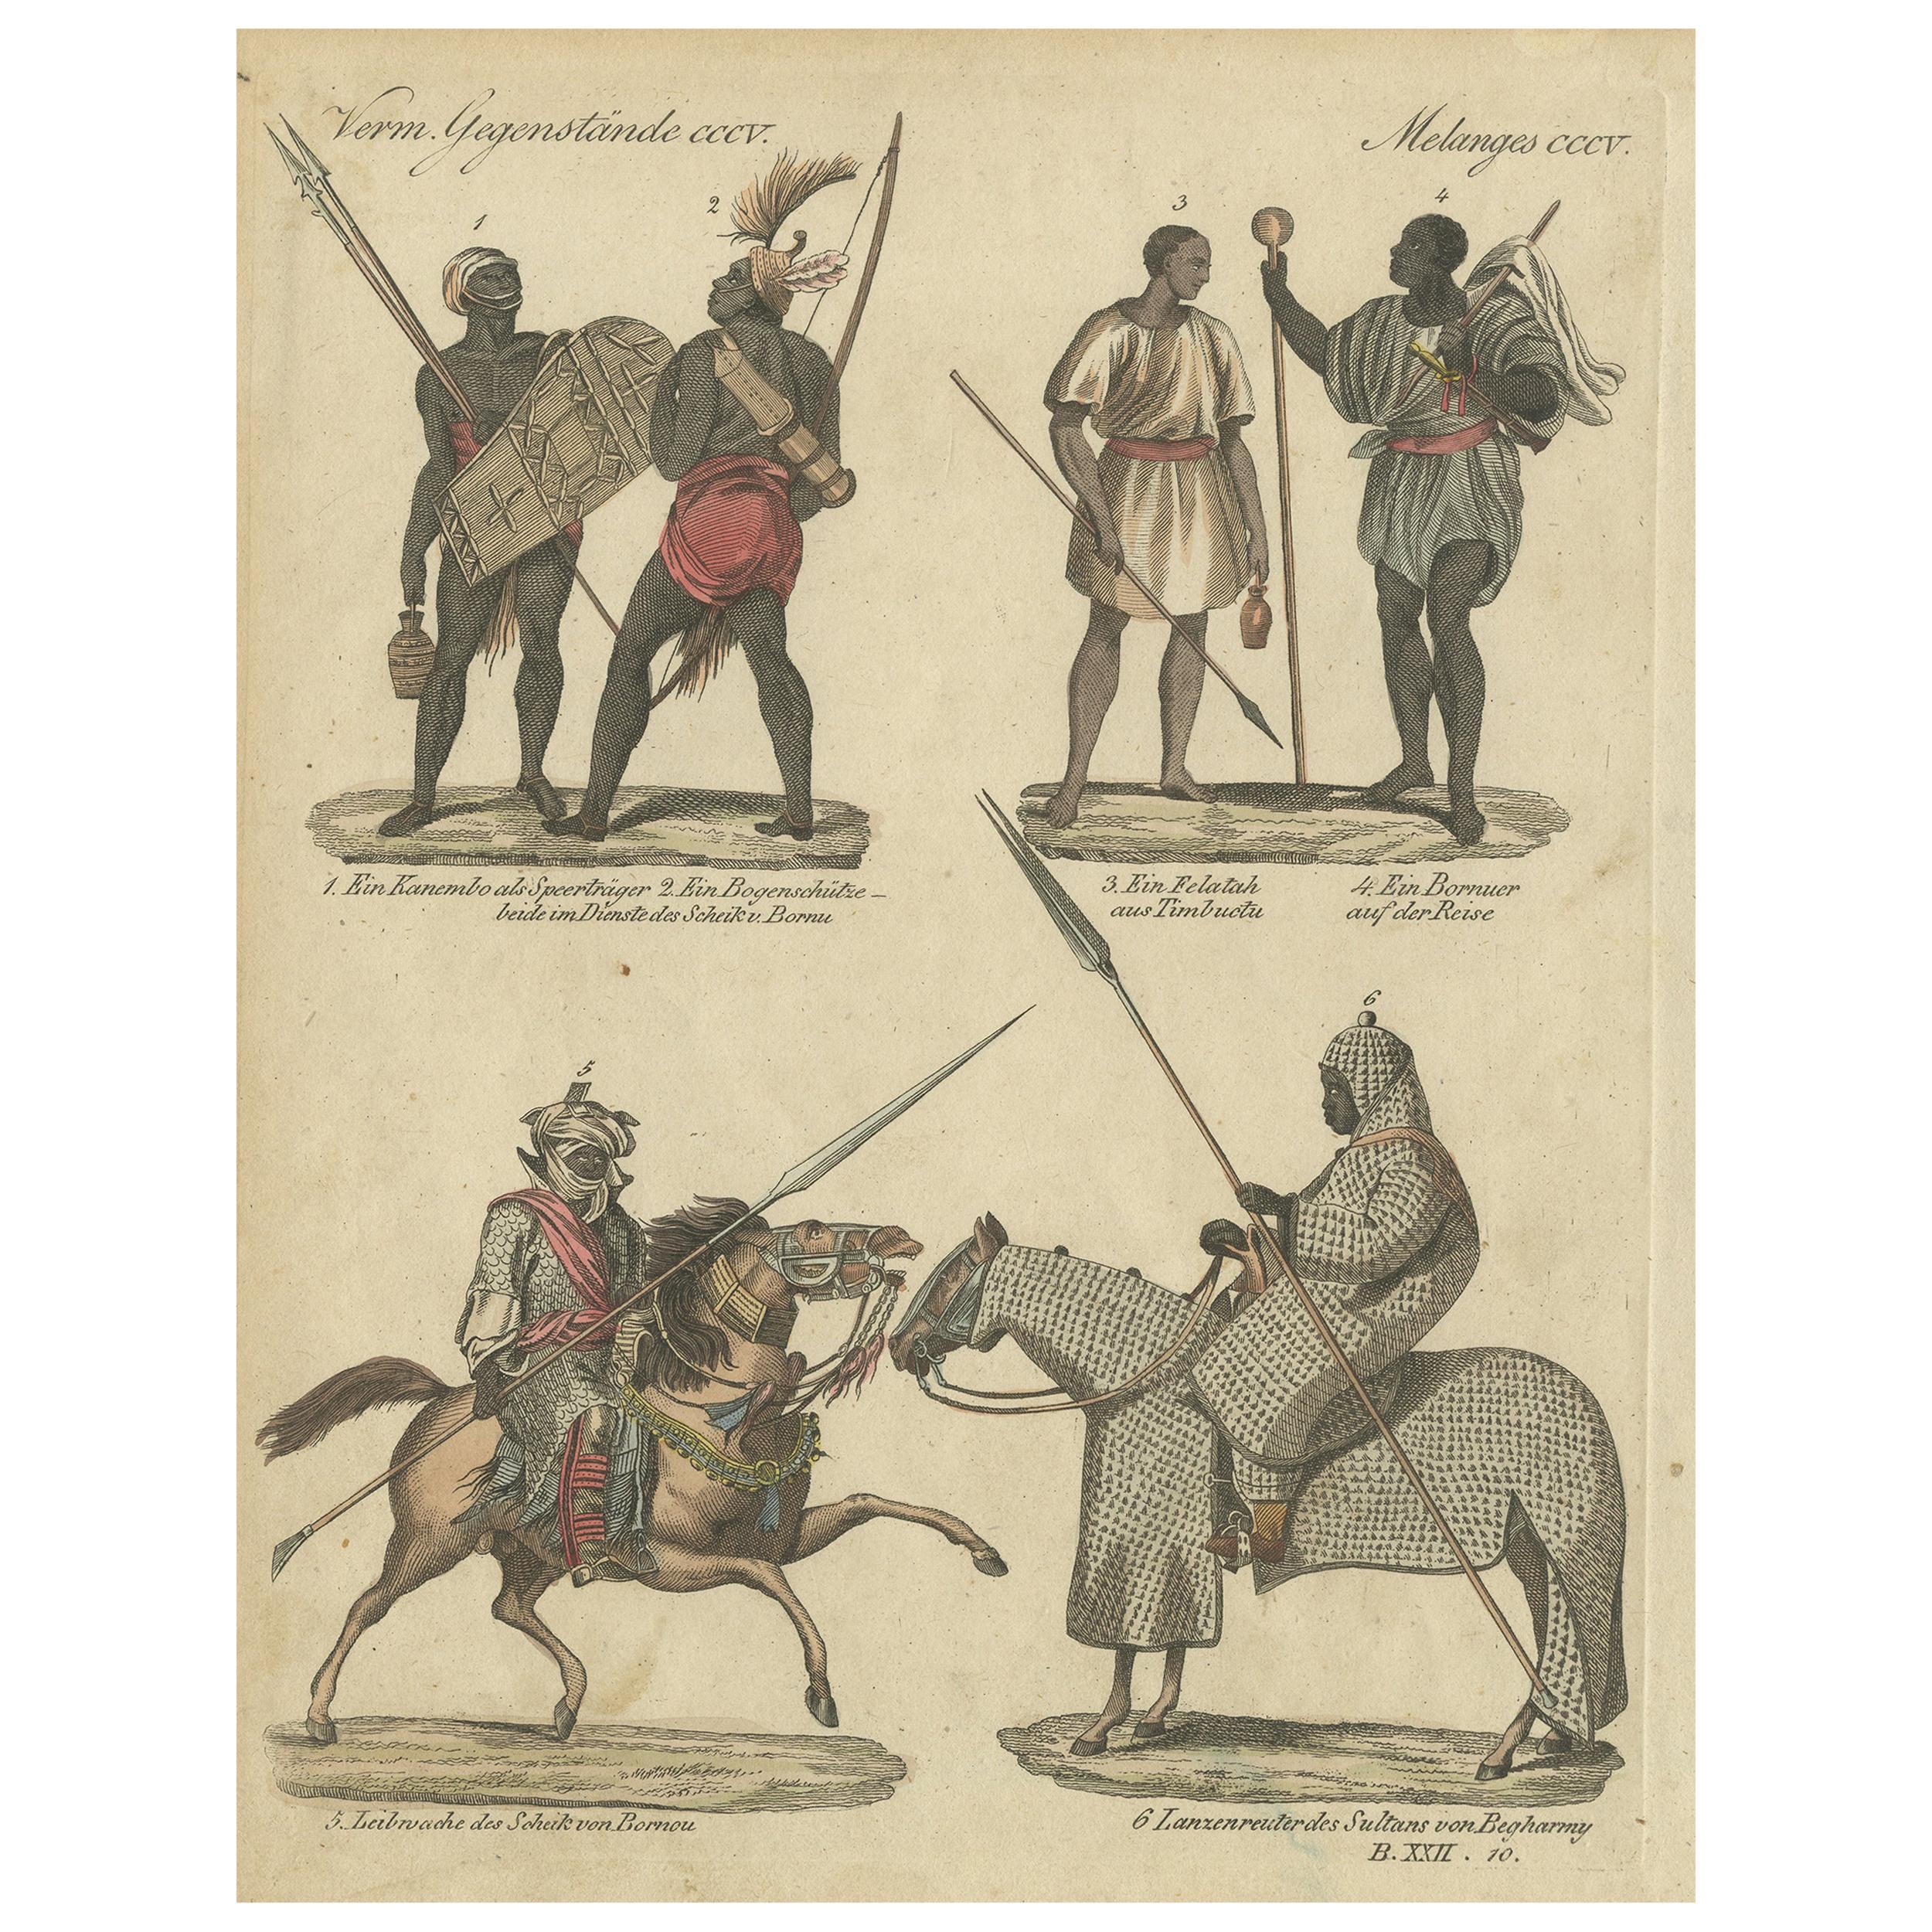 Antique Print of Costumes of Africa by Bertuch, circa 1800